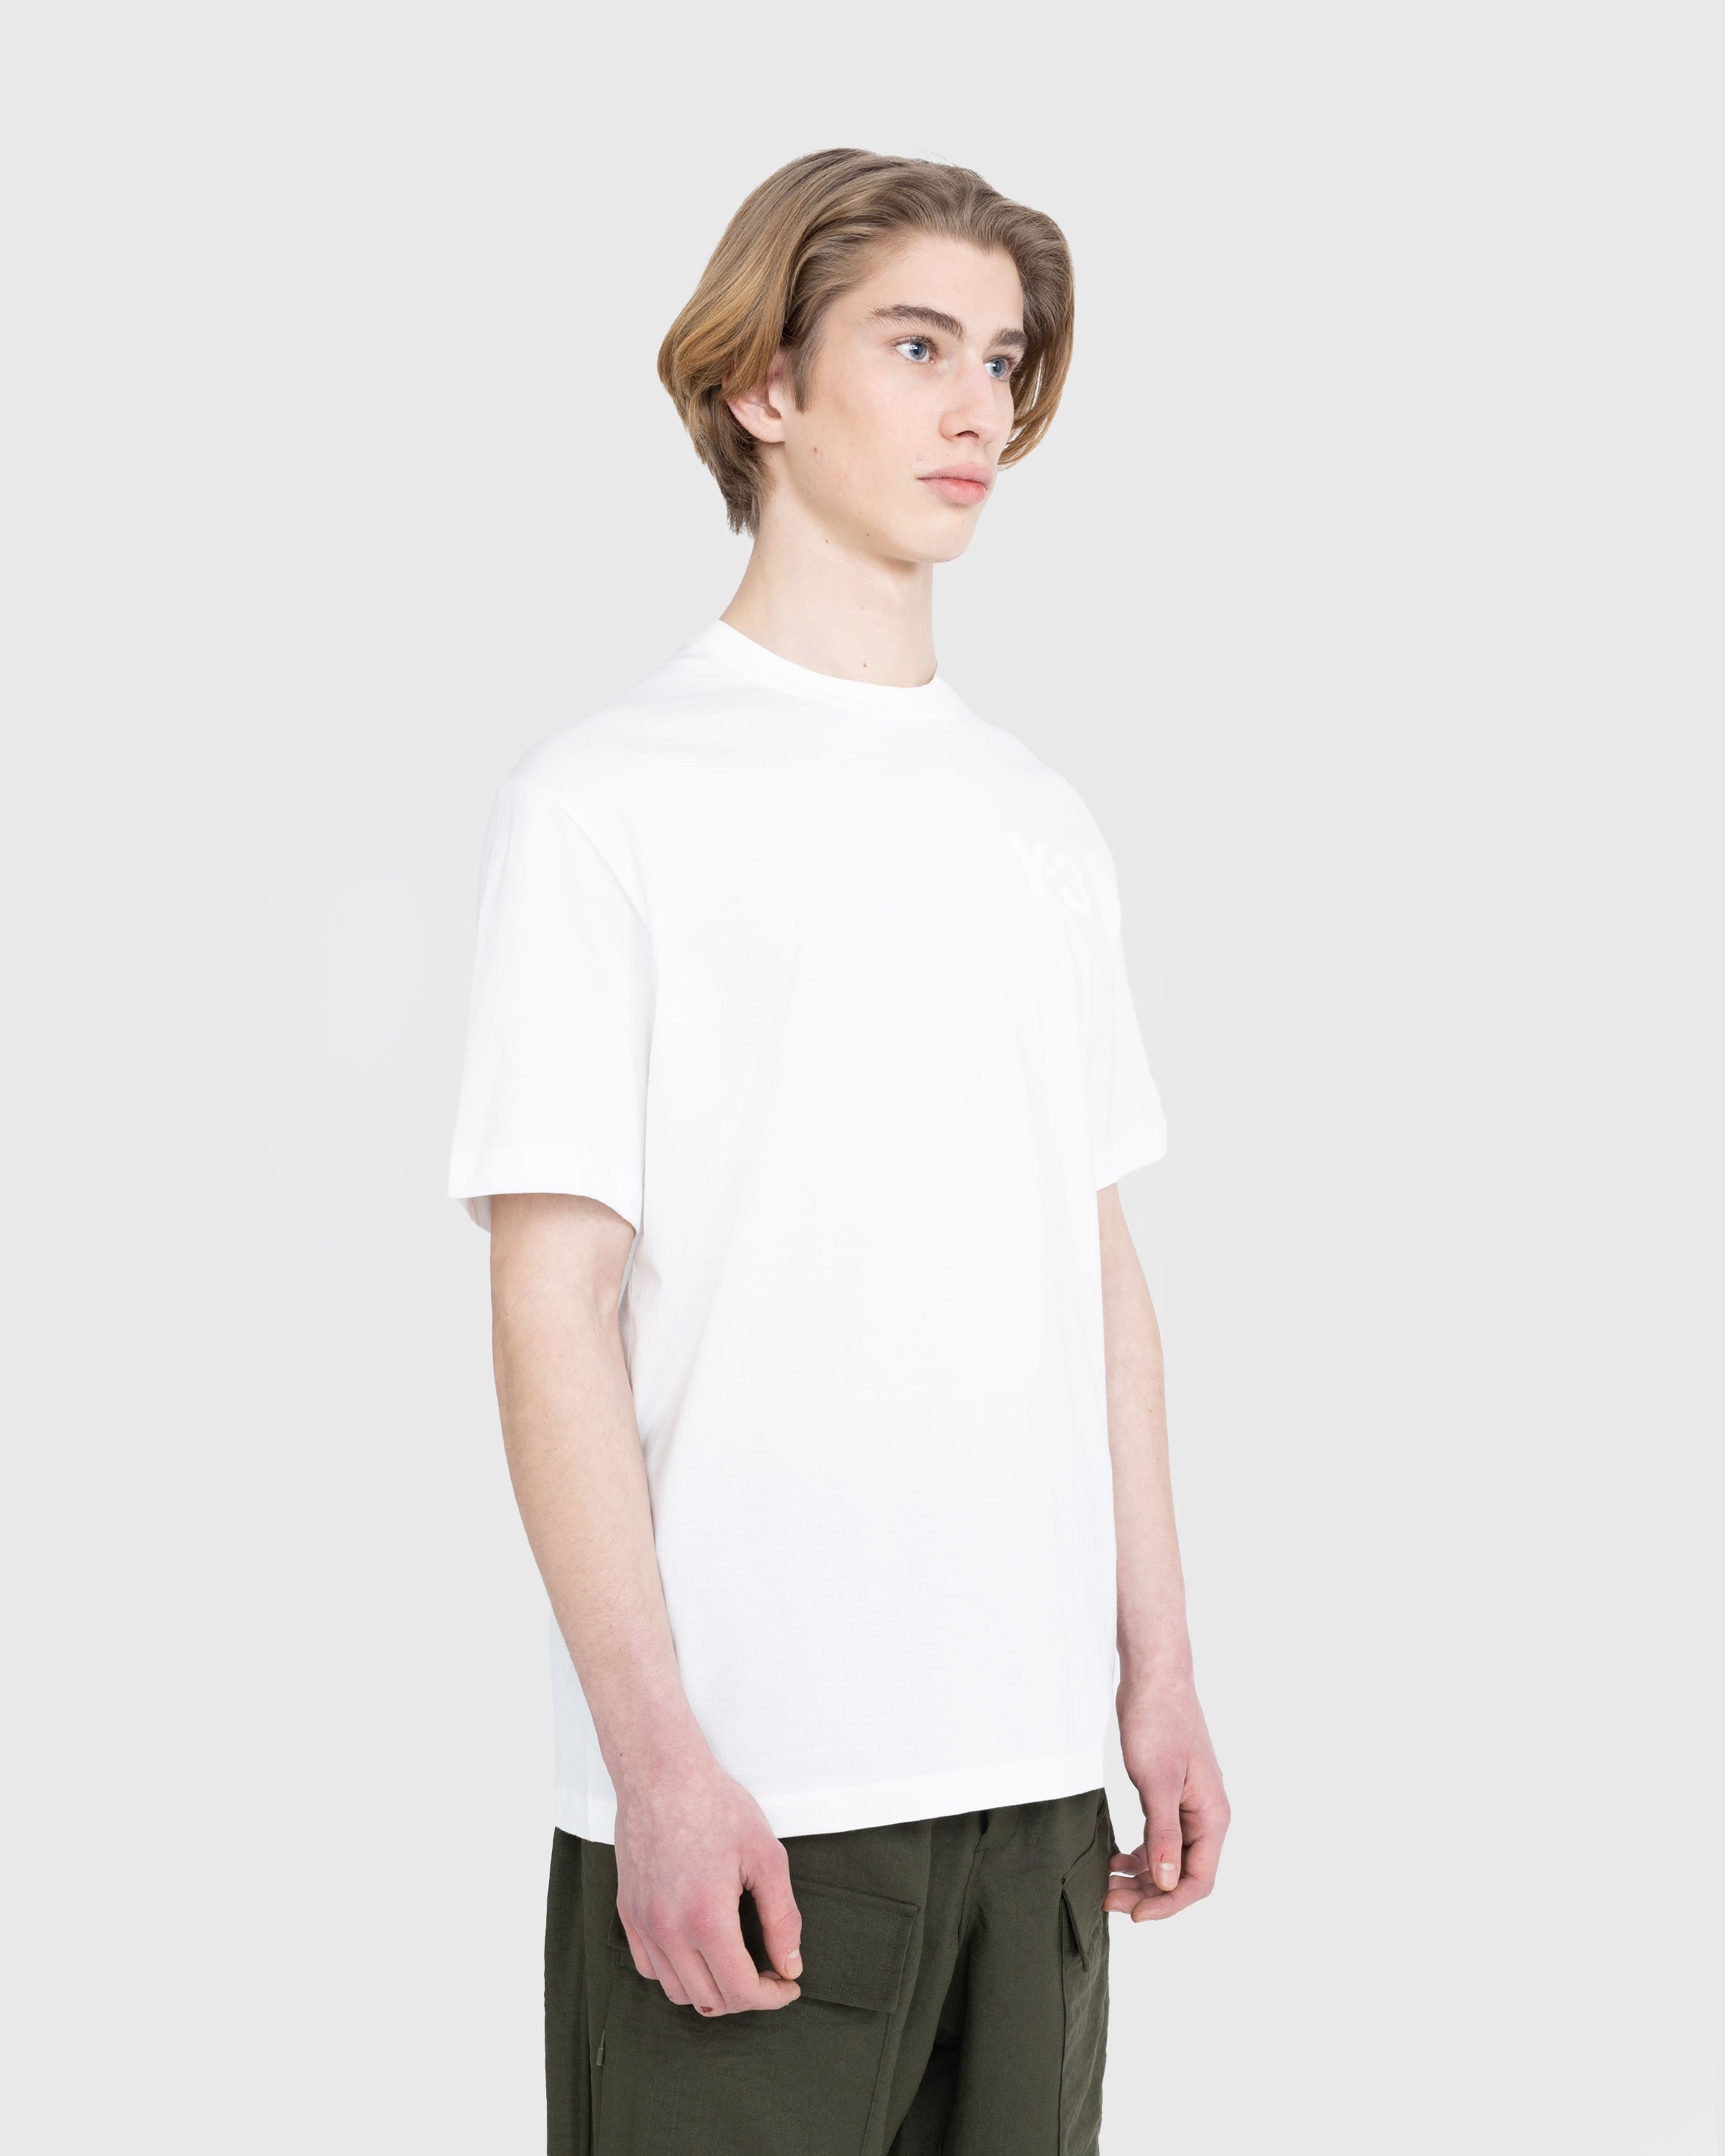 Y-3 - CL C T-Shirt - Clothing - White - Image 4